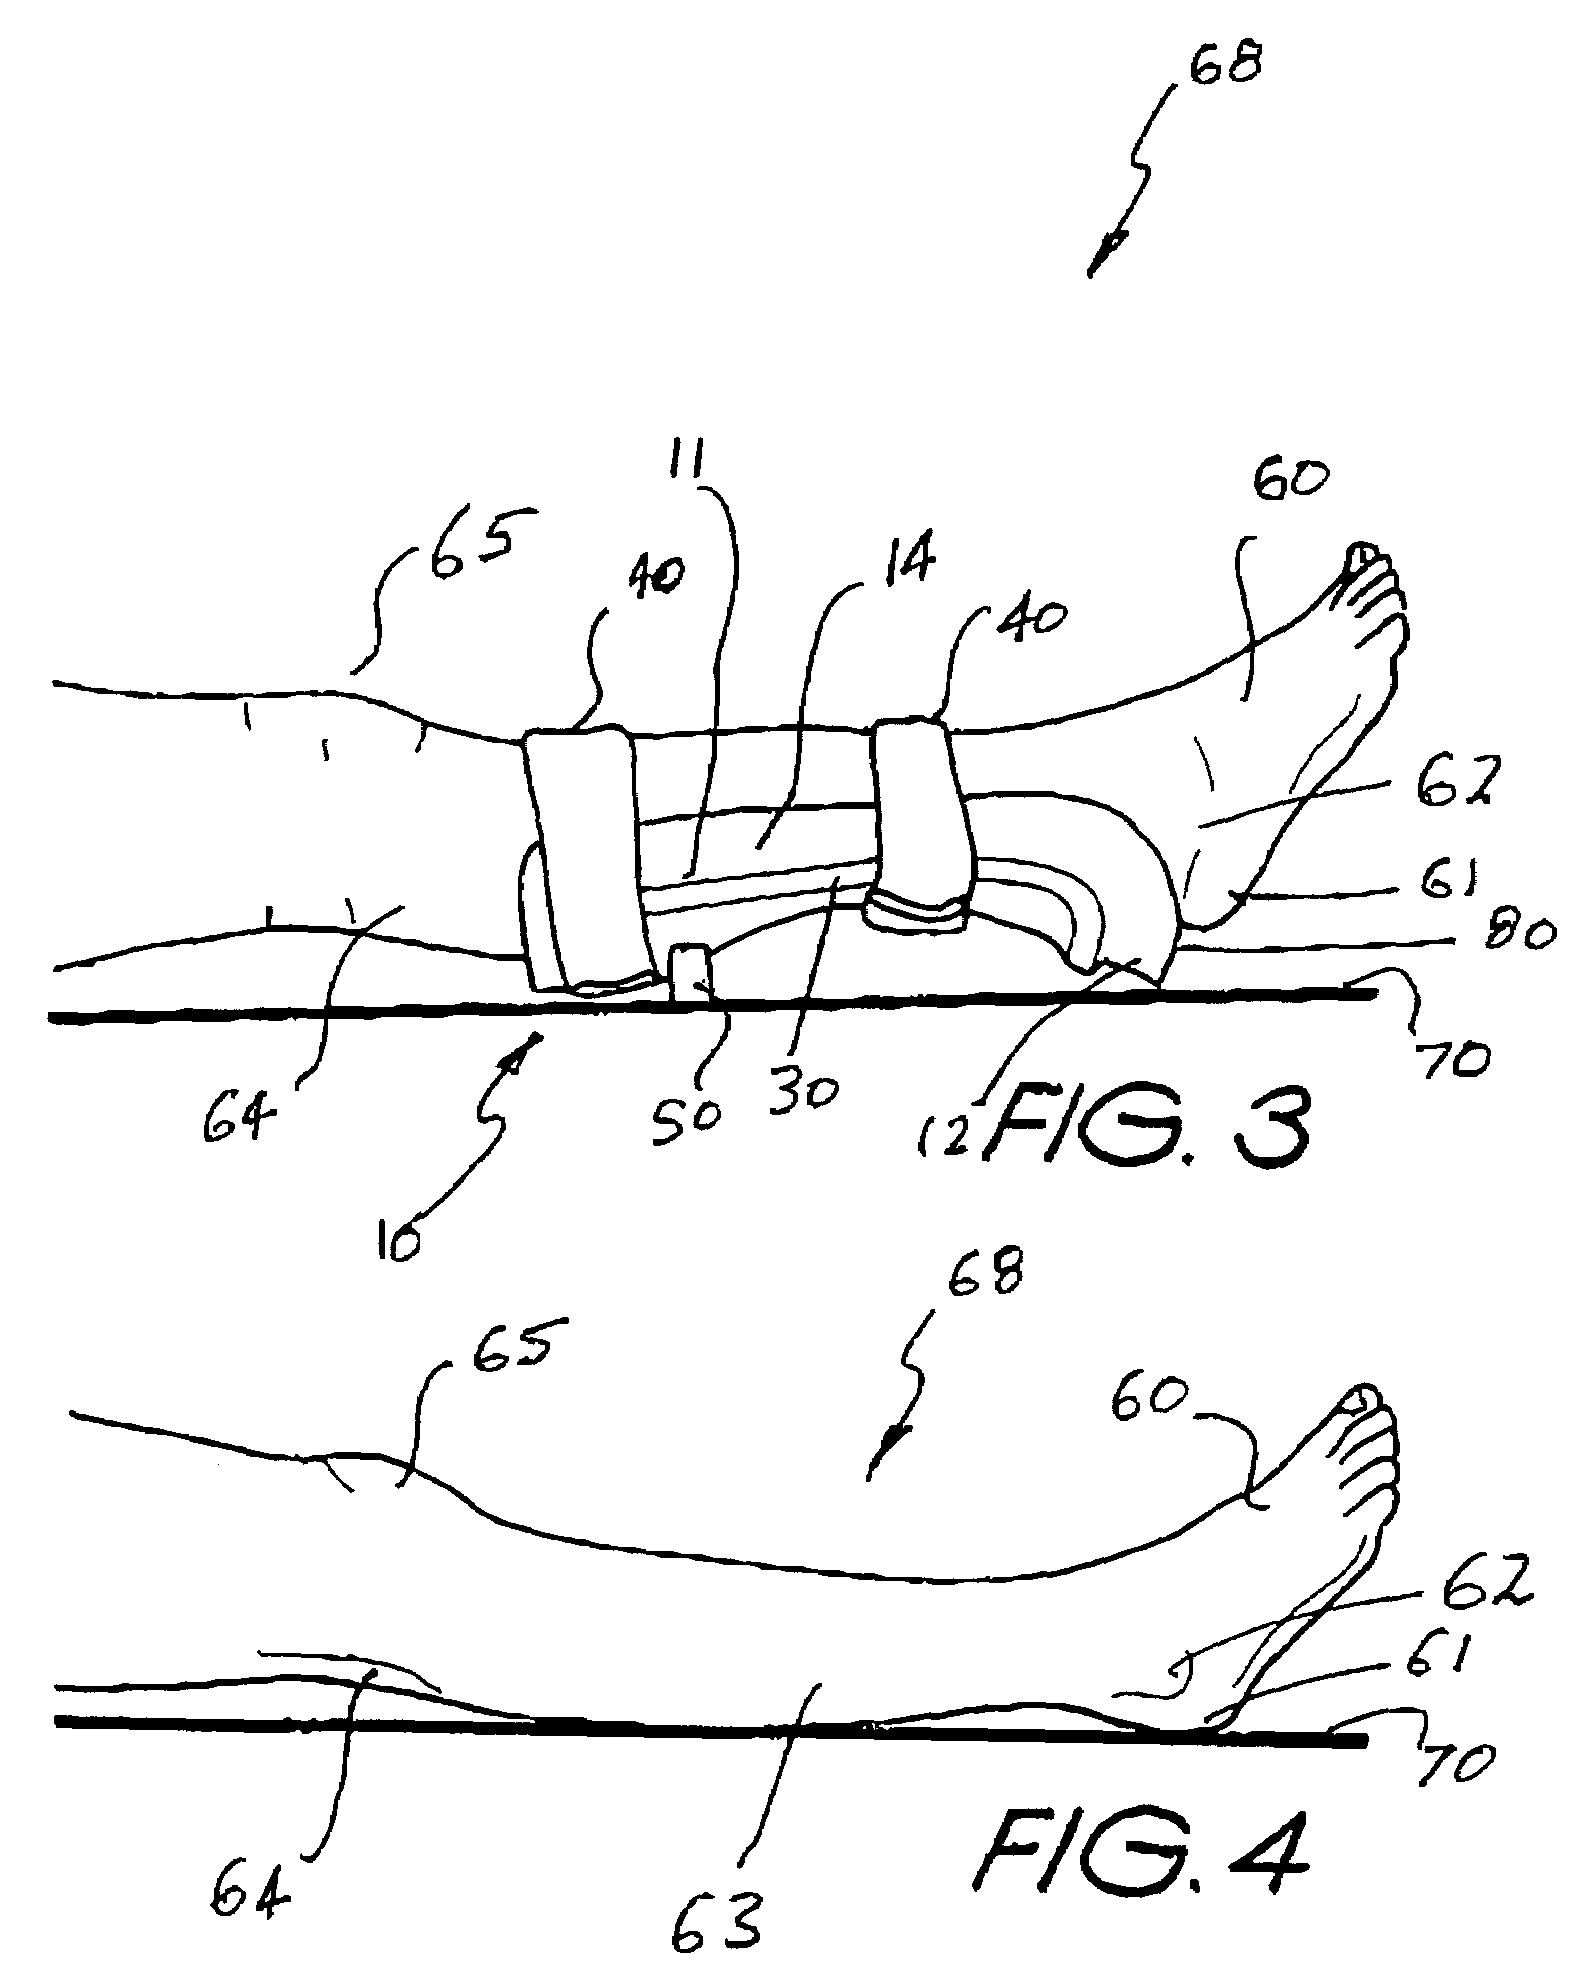 Pressure ulcer prosthesis and method for treating and/or preventing pressure ulcers